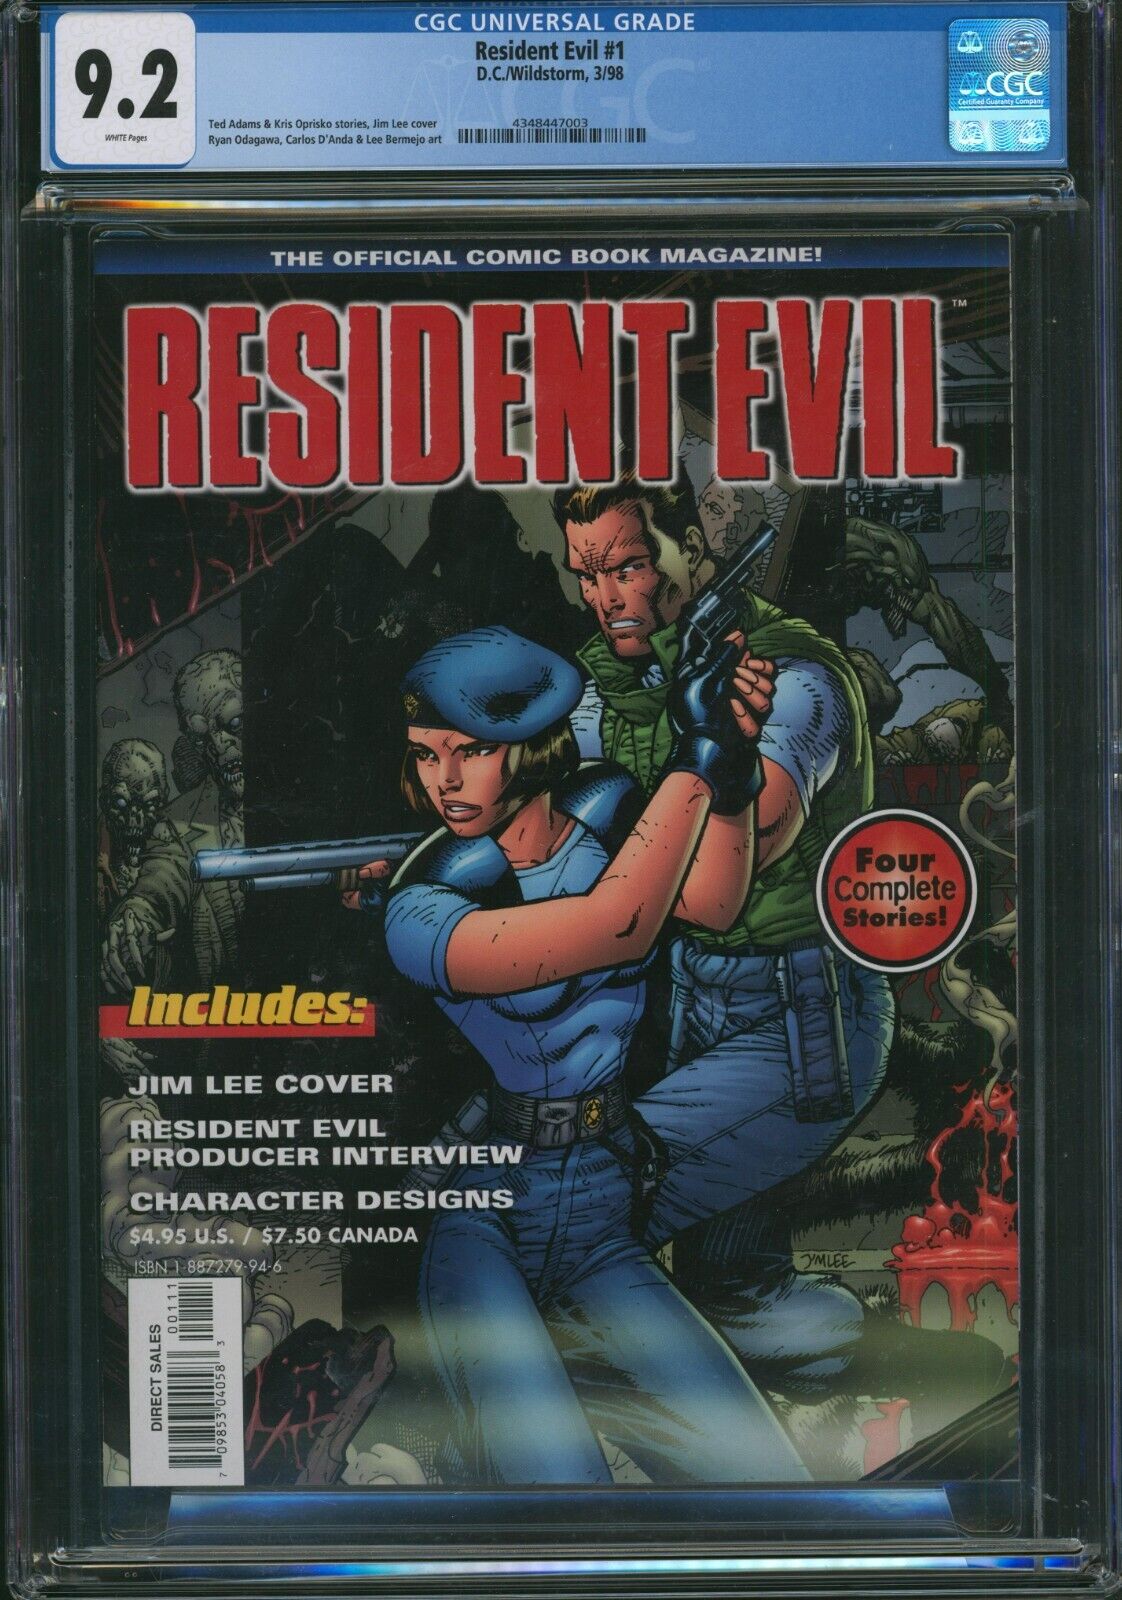 Resident Evil Official Comic Magazine #1 CGC 9.2 March 1998 Jim Lee Cover